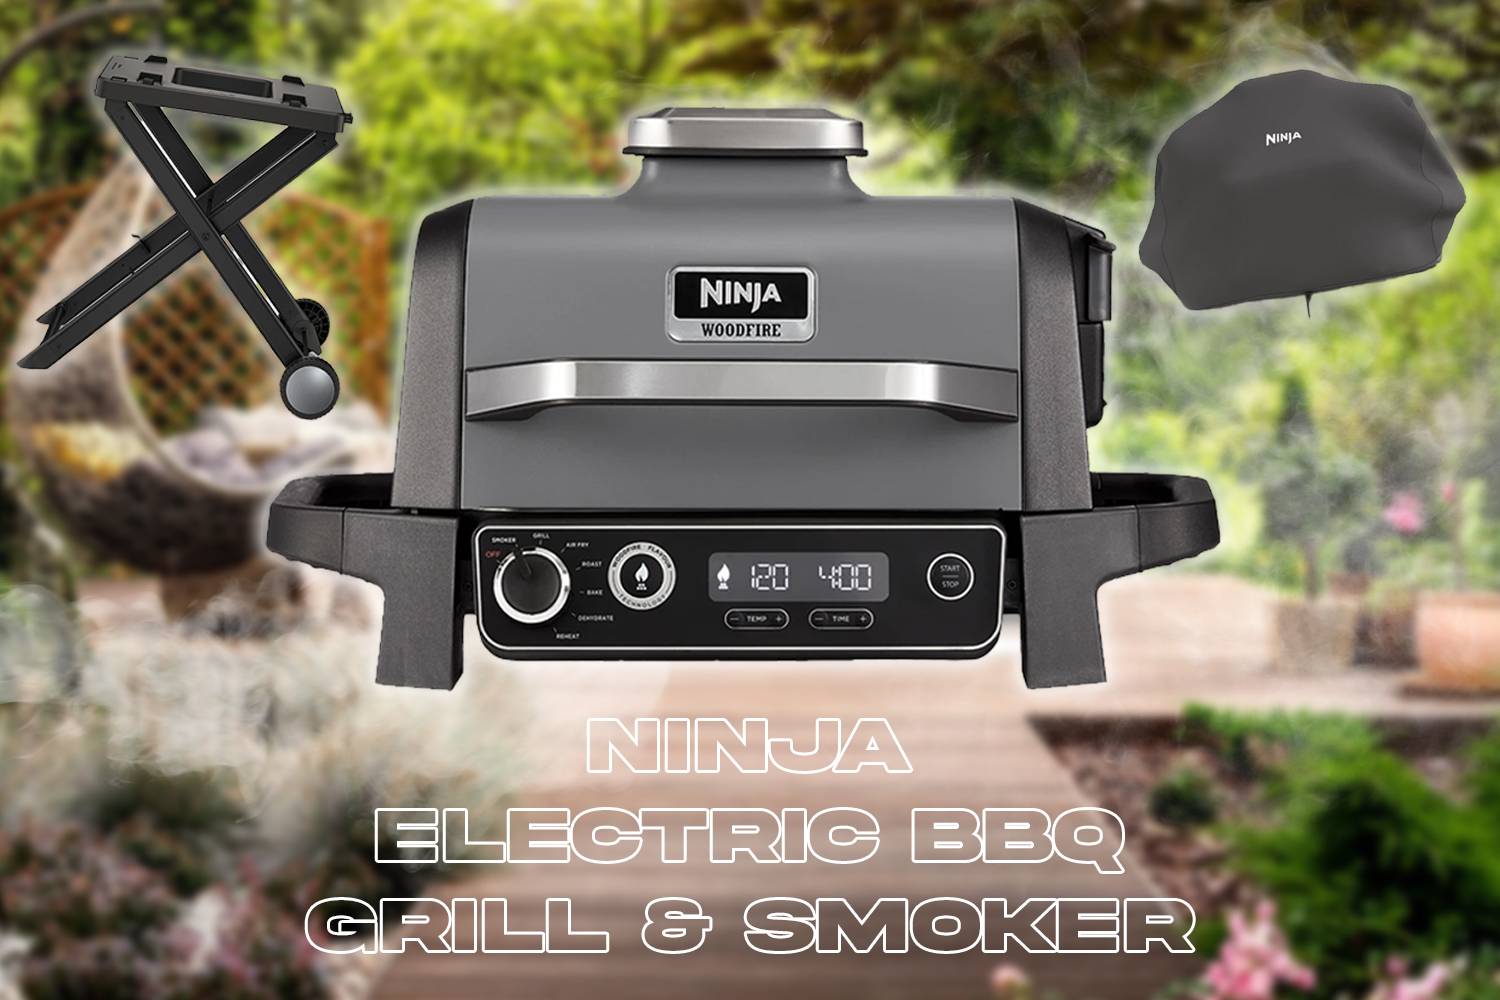 Win this Ninja Woodfire Pro XL Electric BBQ Grill & Smoker - Only 837 Entries